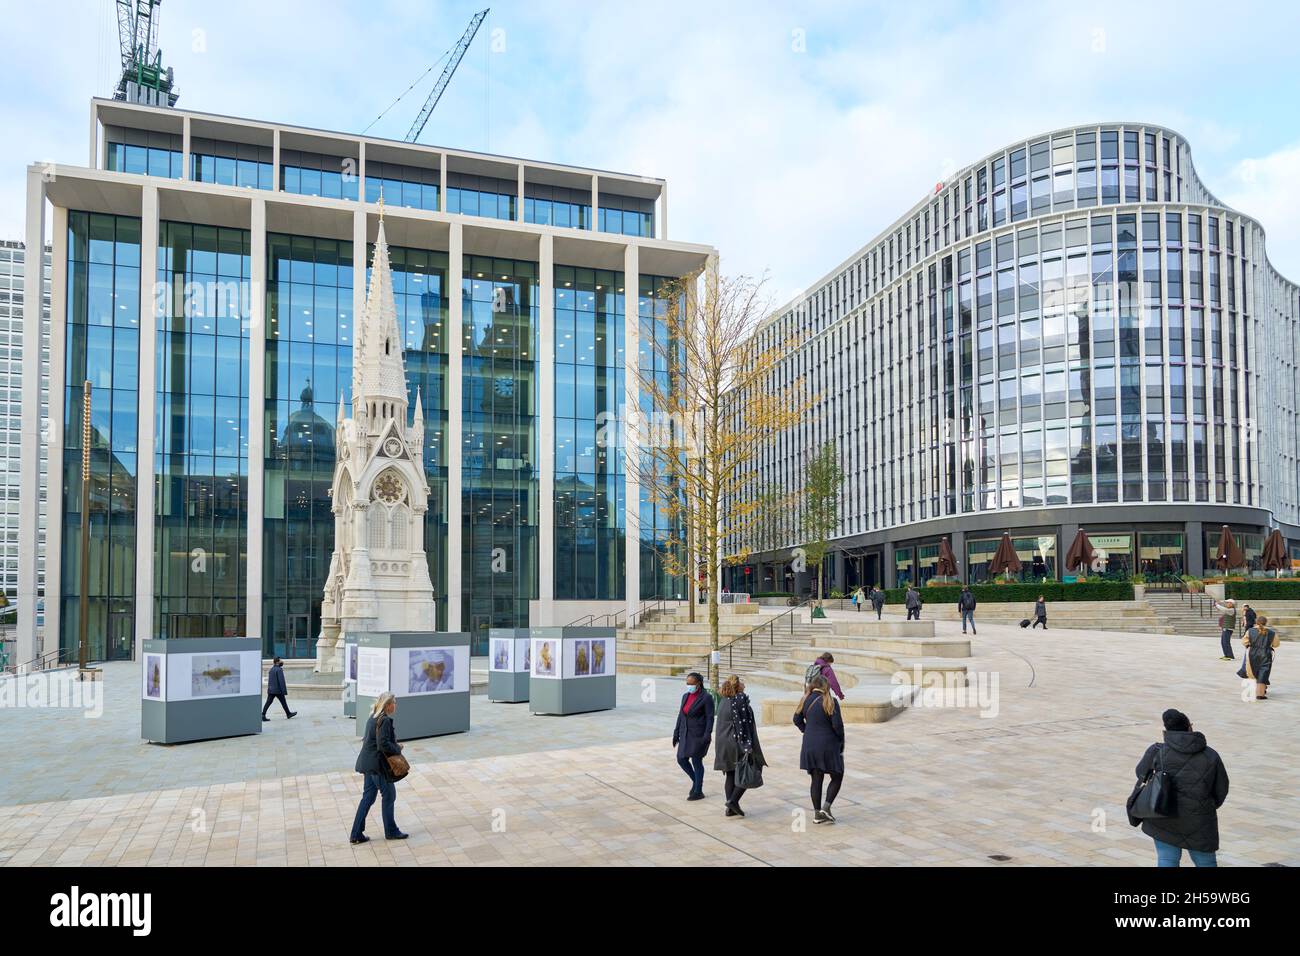 Paradise development, Birmingham UK. New £700m Premium office space in the City centre on the site of the old Birmingham library. Stock Photo